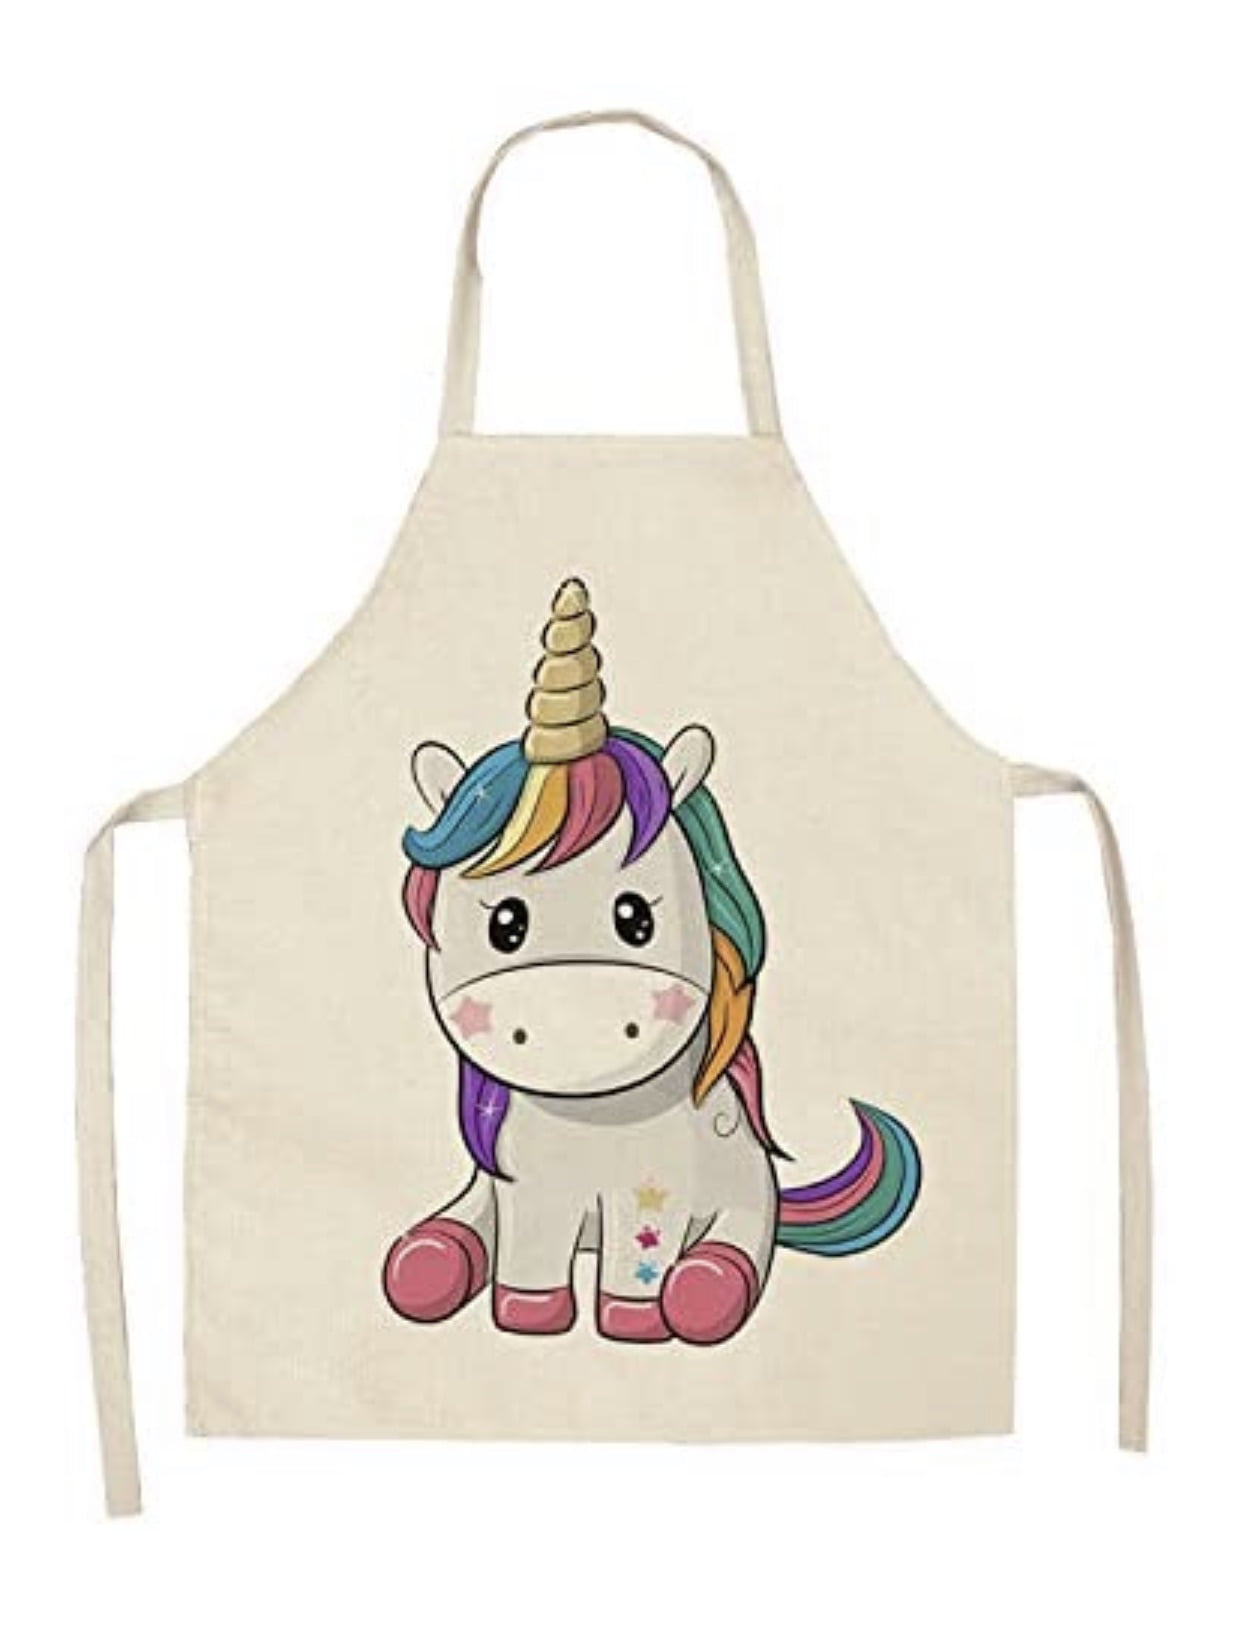 Kids Chef Costume for Boys Girls Baking Gardening Painting Role Play Age 3-12 M Unicorn Kids Apron and Chef Hat Set